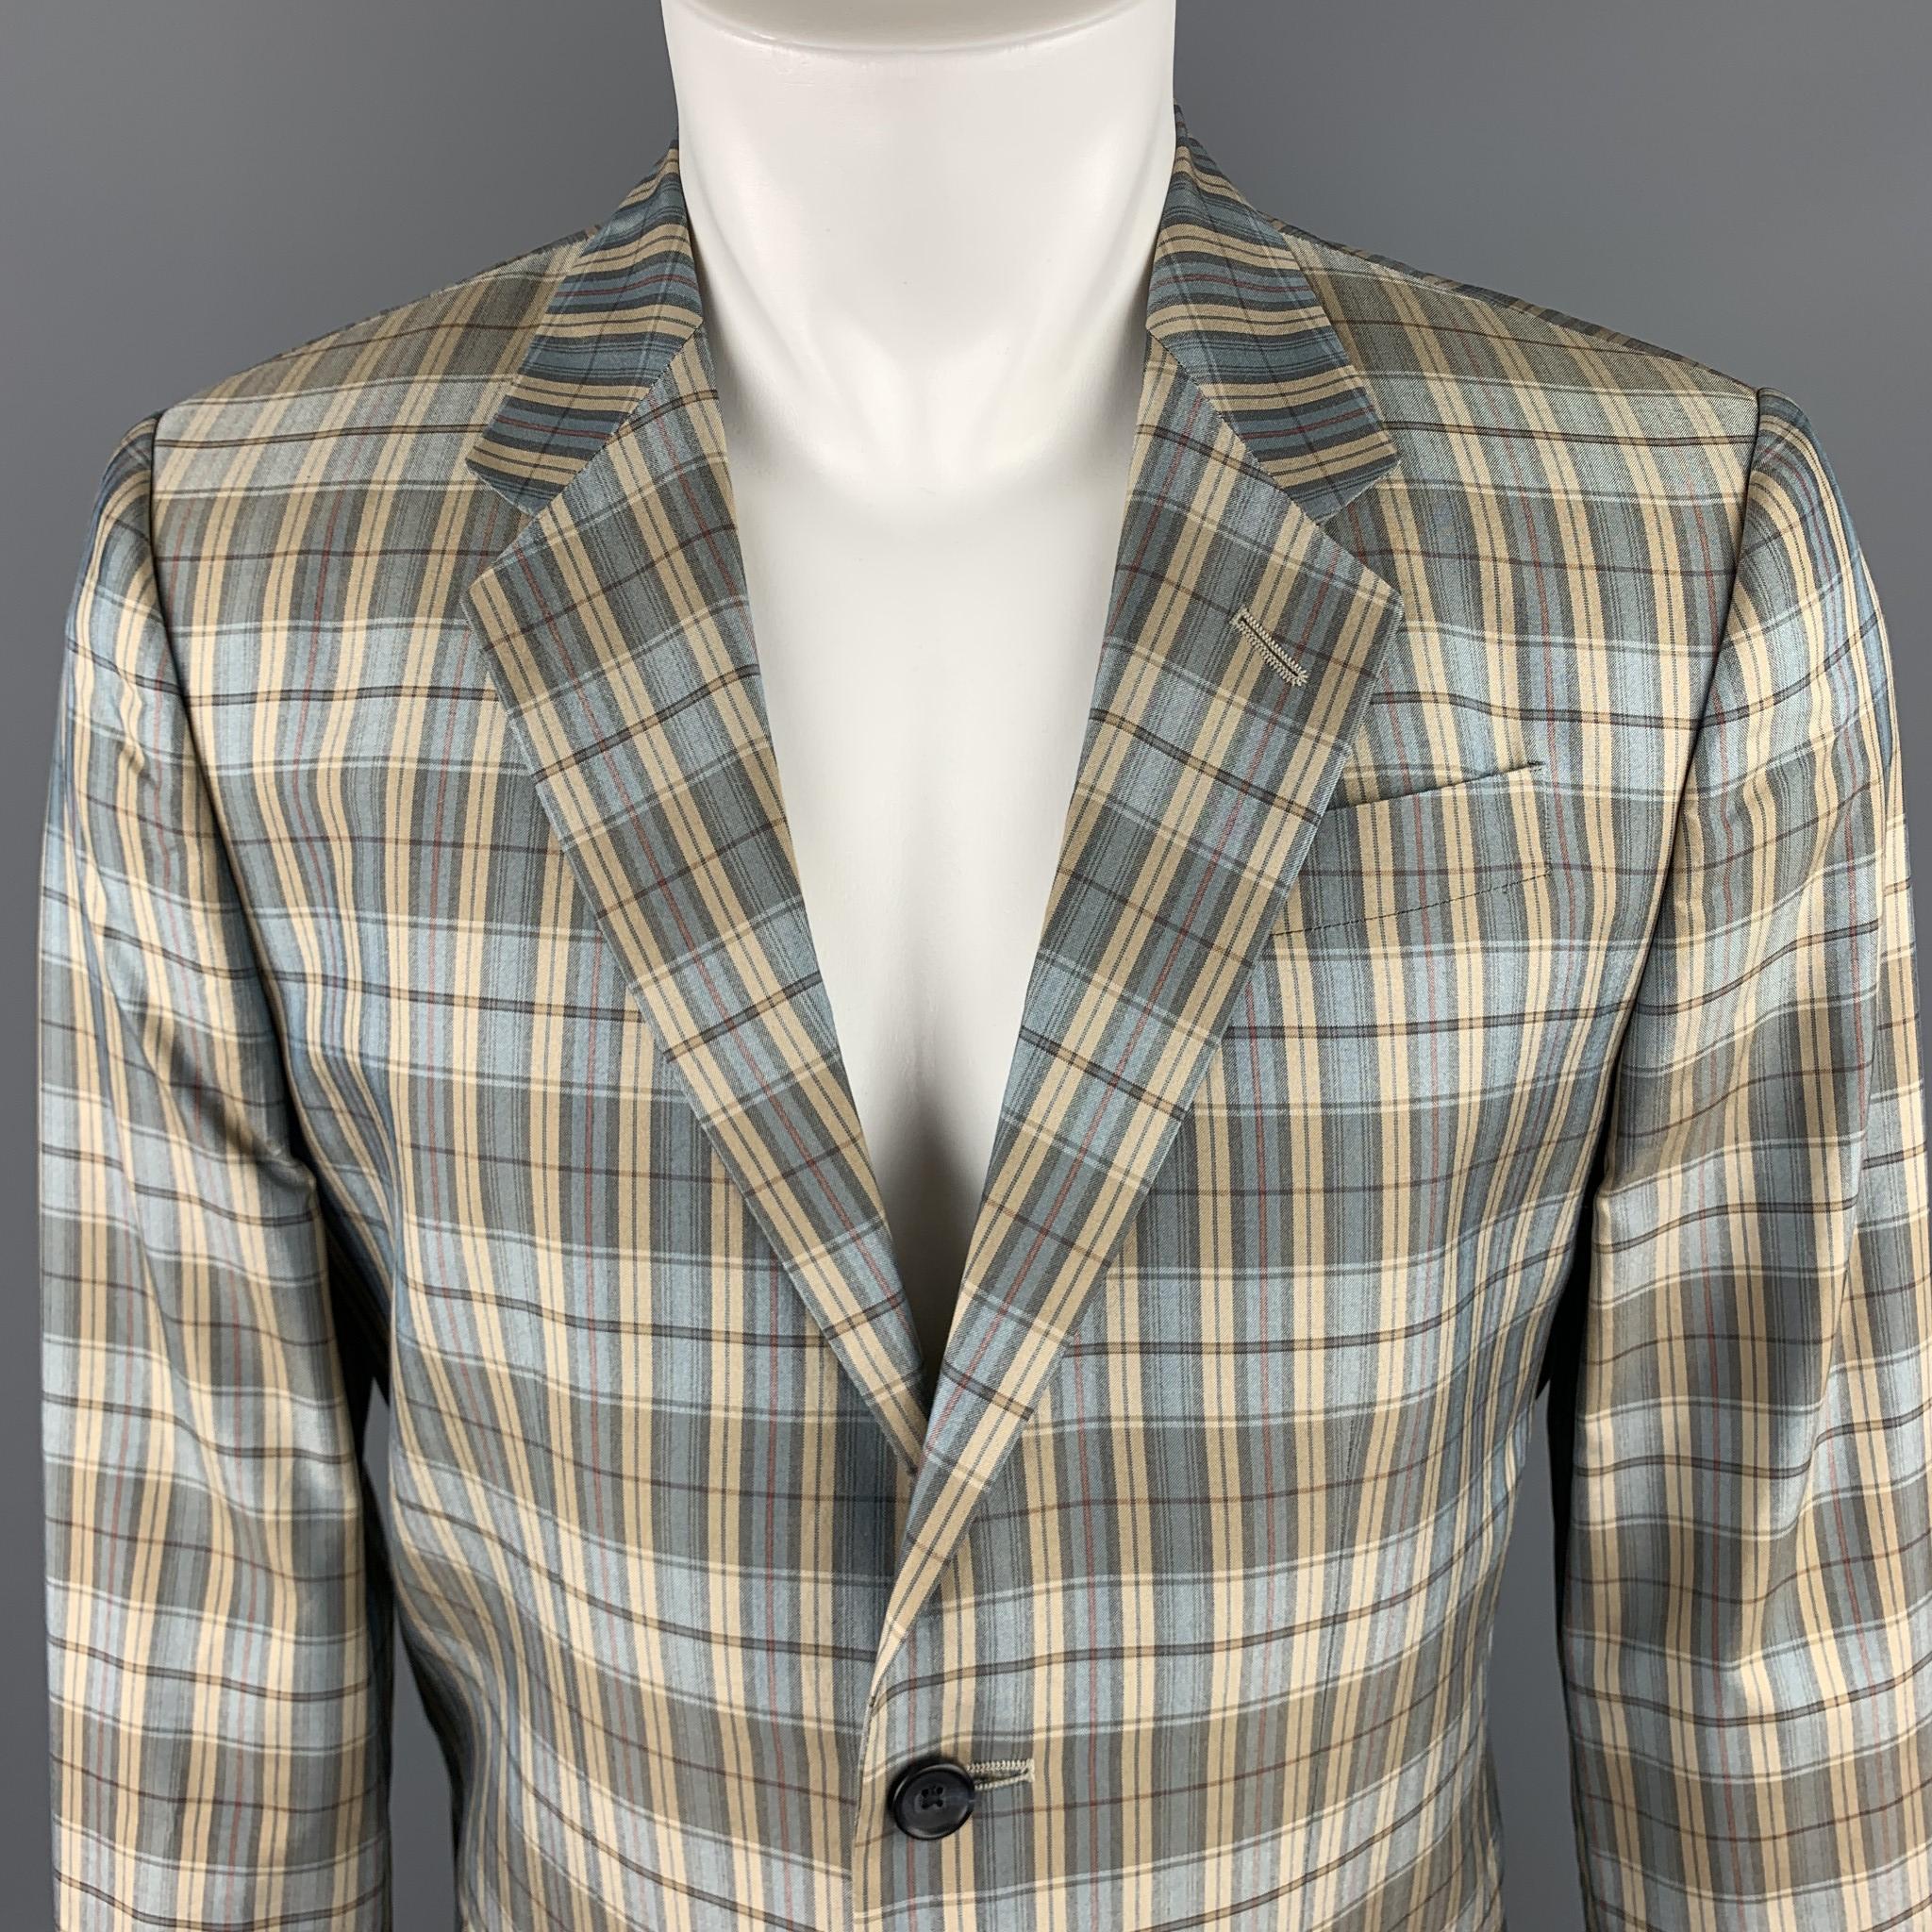 MARC by MARC JACOBS sport coat comes in with a notch lapel, single breasted, two button front, and functional button cuffs. 

Excellent Pre-Owned Condition.
Marked: L

Measurements:

Shoulder: 17 in.
Chest: 42 in.
Sleeve: 26 in.
Length: 28.5 in.